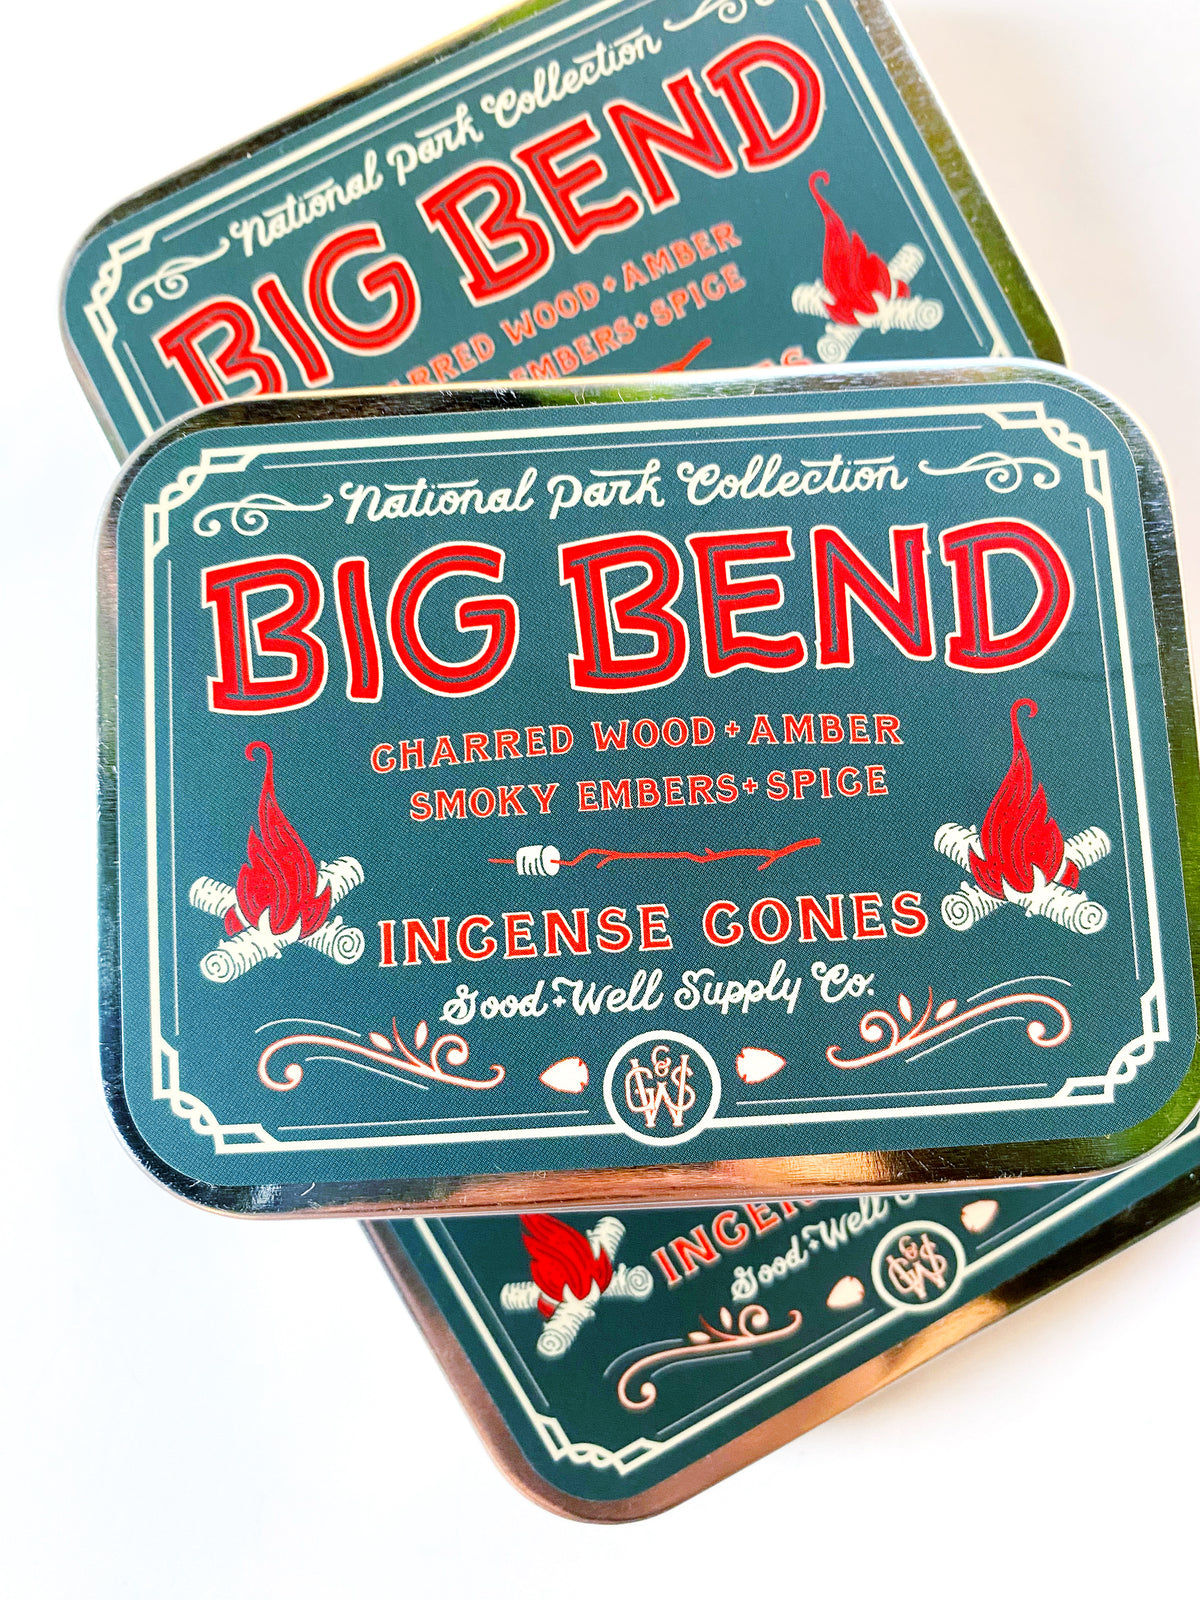 Good Well Supply Co: Big Bend Incense - Charred Wood Smoky Embers Amber + Spice